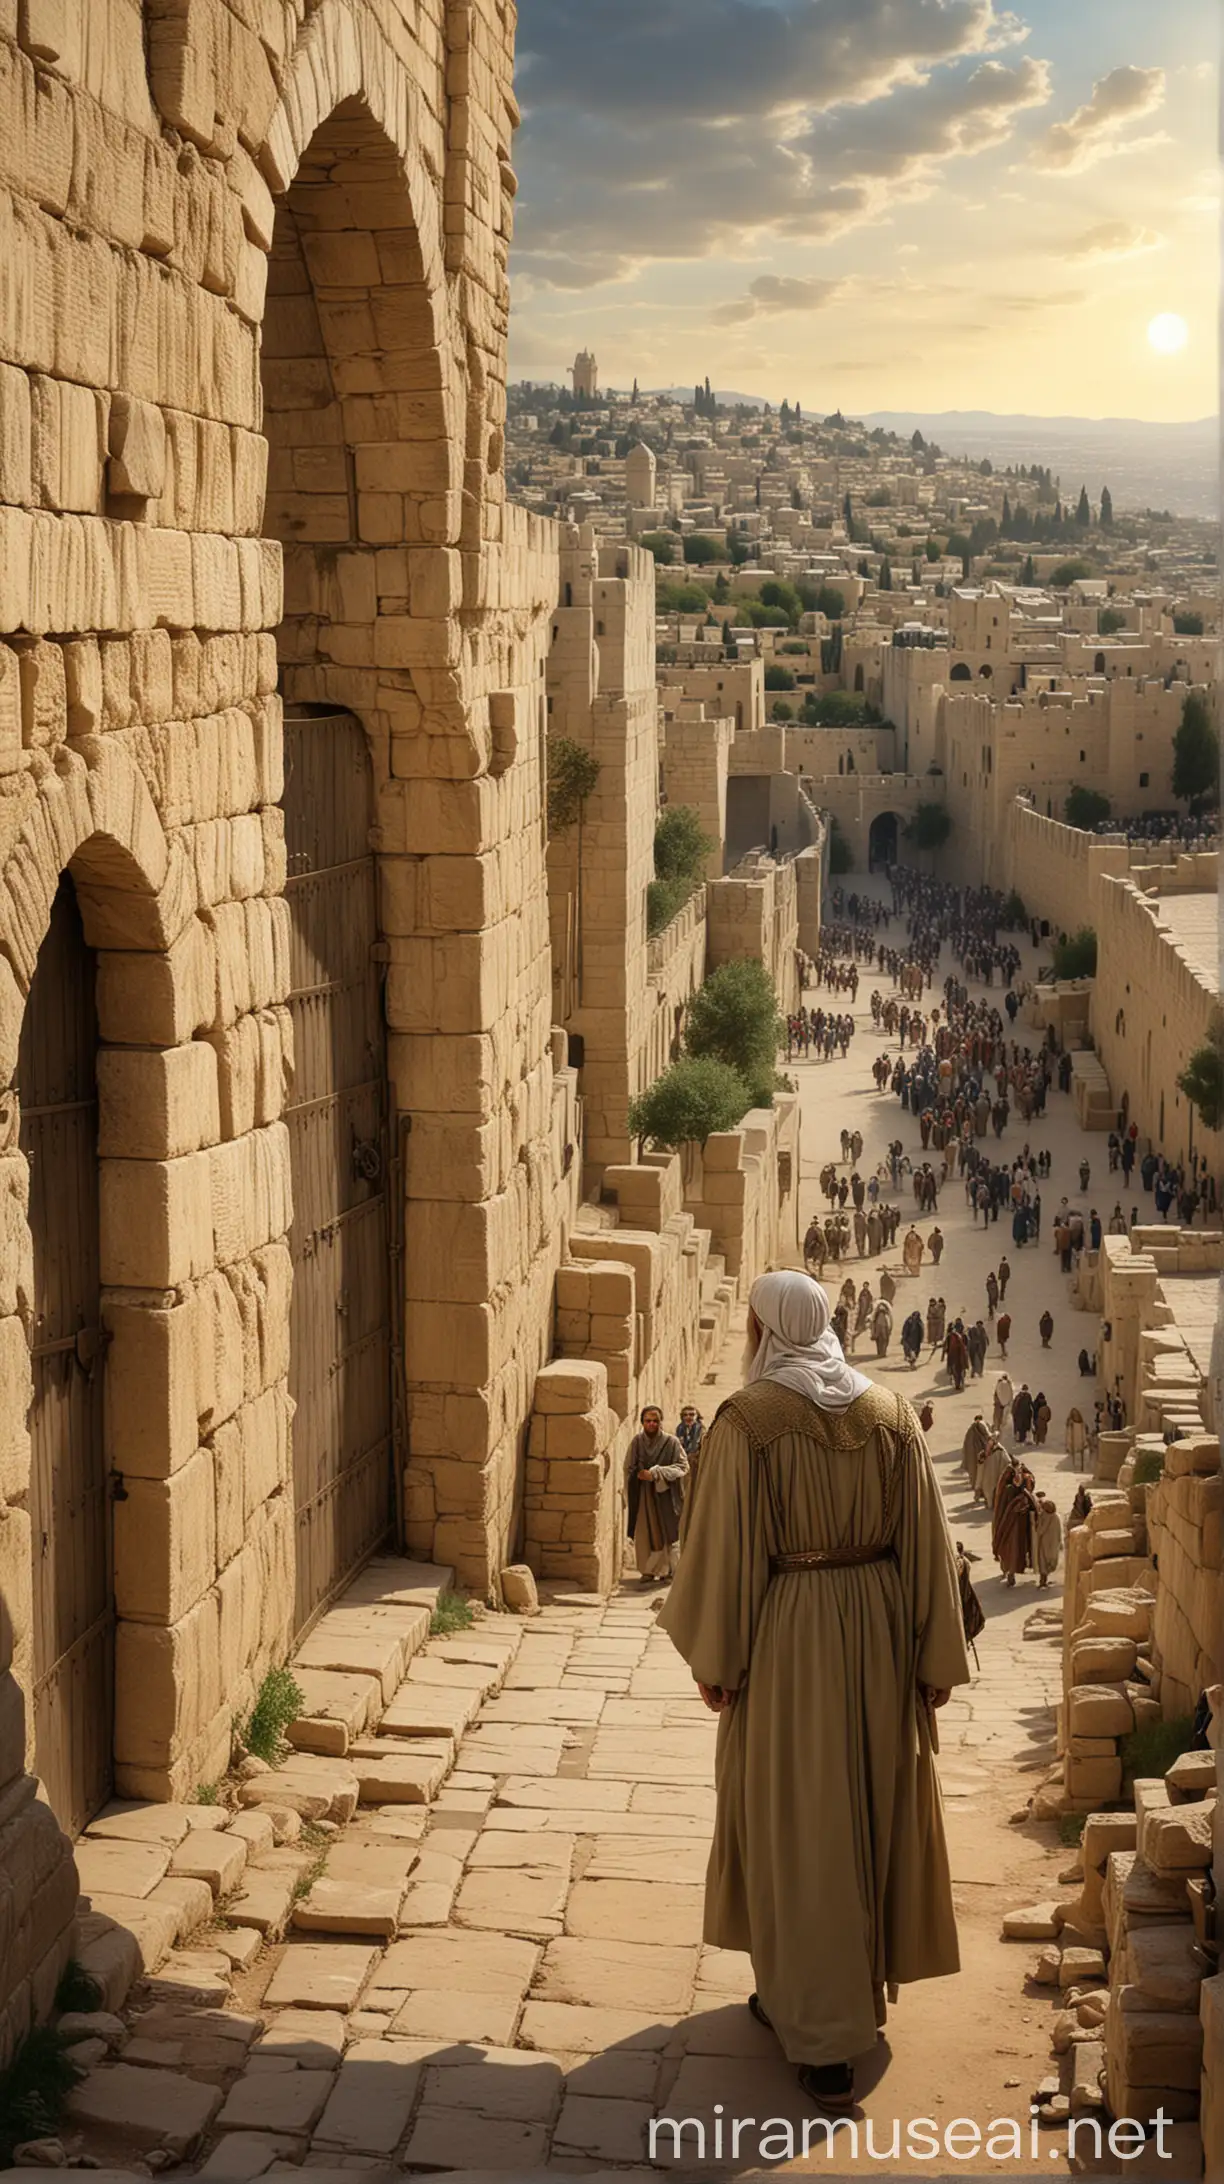 Prophet Jeremiah, dressed in simple robes, approaches the Benjamin Gate. He is stopped by Irijah, who looks suspicious and confrontational. The ancient gate and the city walls of Jerusalem are visible in the background."In ancient world 